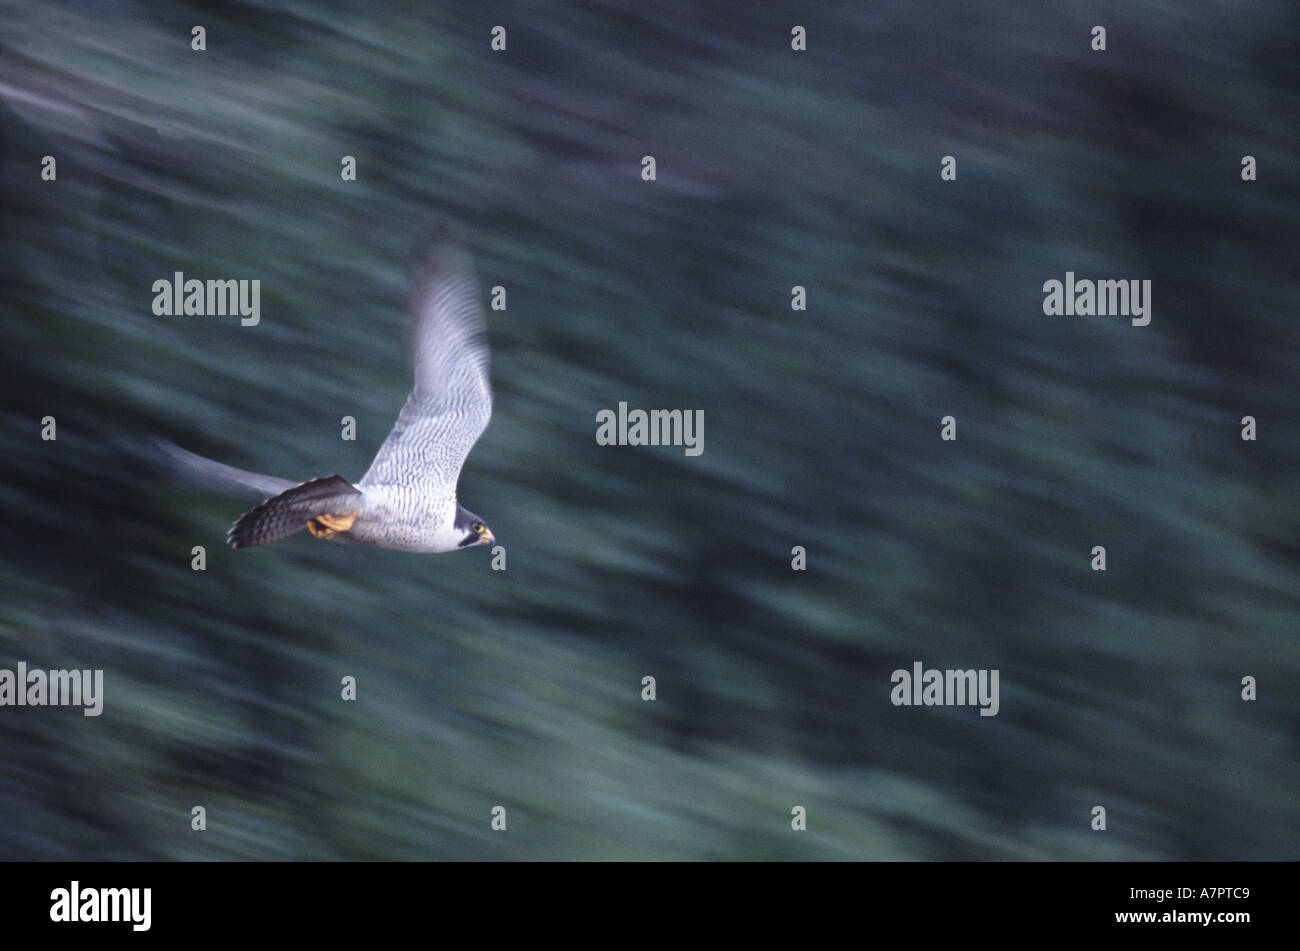 Peregrine falcon, Falco peregrinus, flying at high speed beside Porcupine river, Alaska. August, 2003. Stock Photo